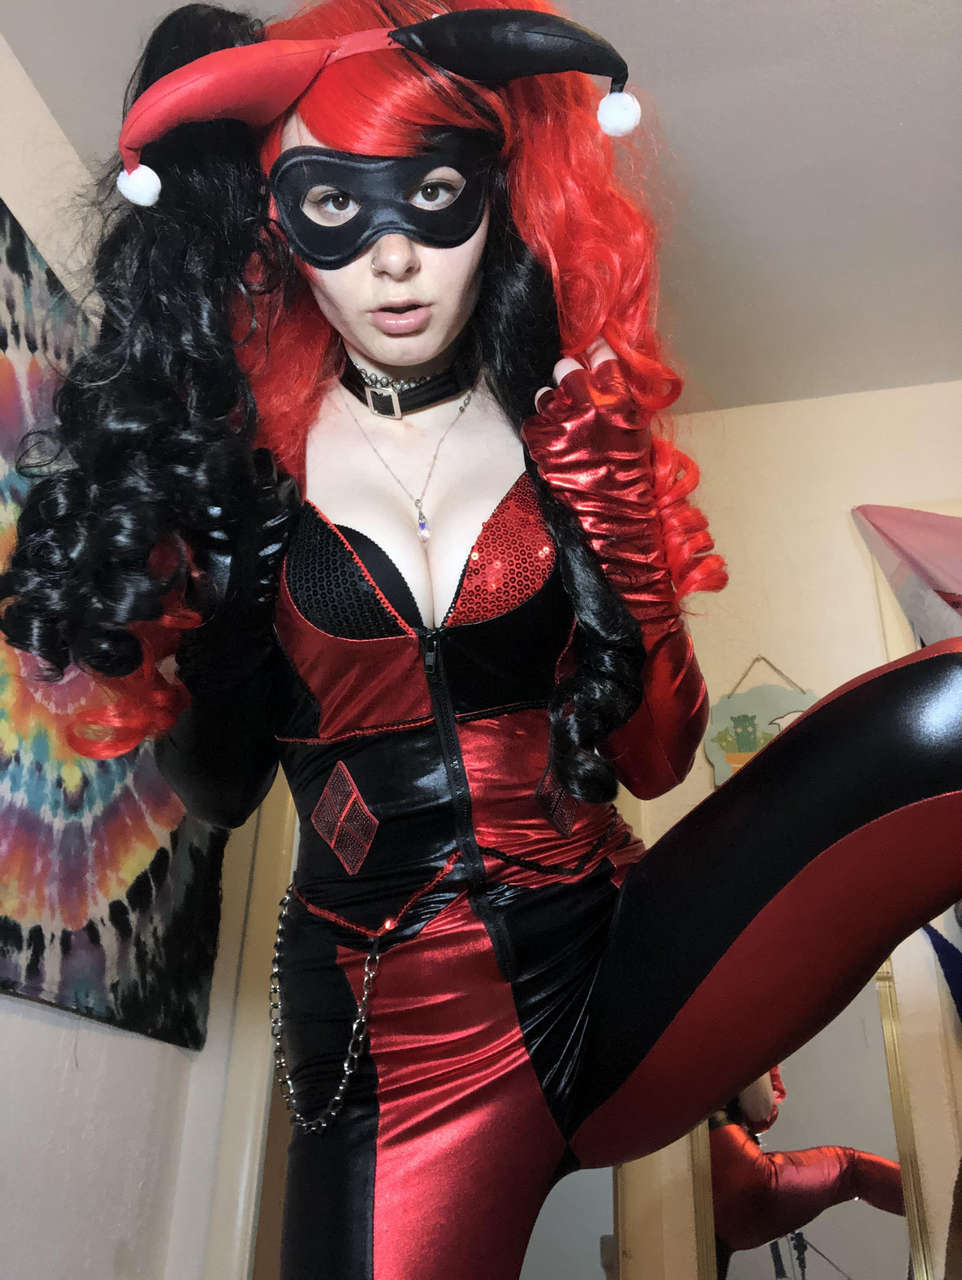 Me As Harley Quin